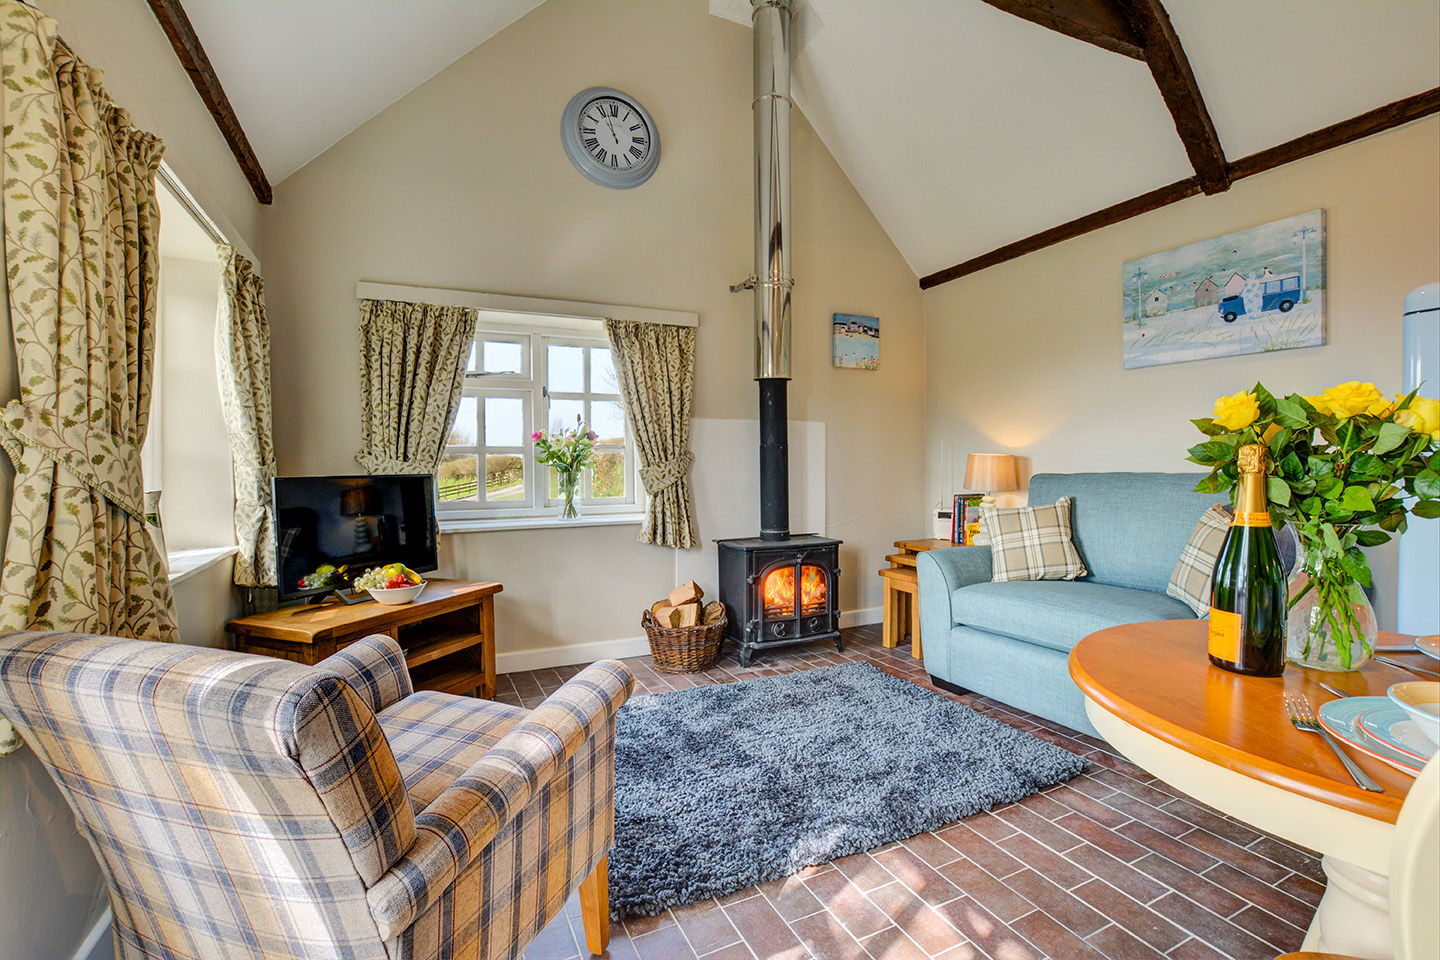 The lounge at Jingles luxury self catering holiday cottage at Penrose Burden in North Cornwall near Bodmin Moor02.jpg